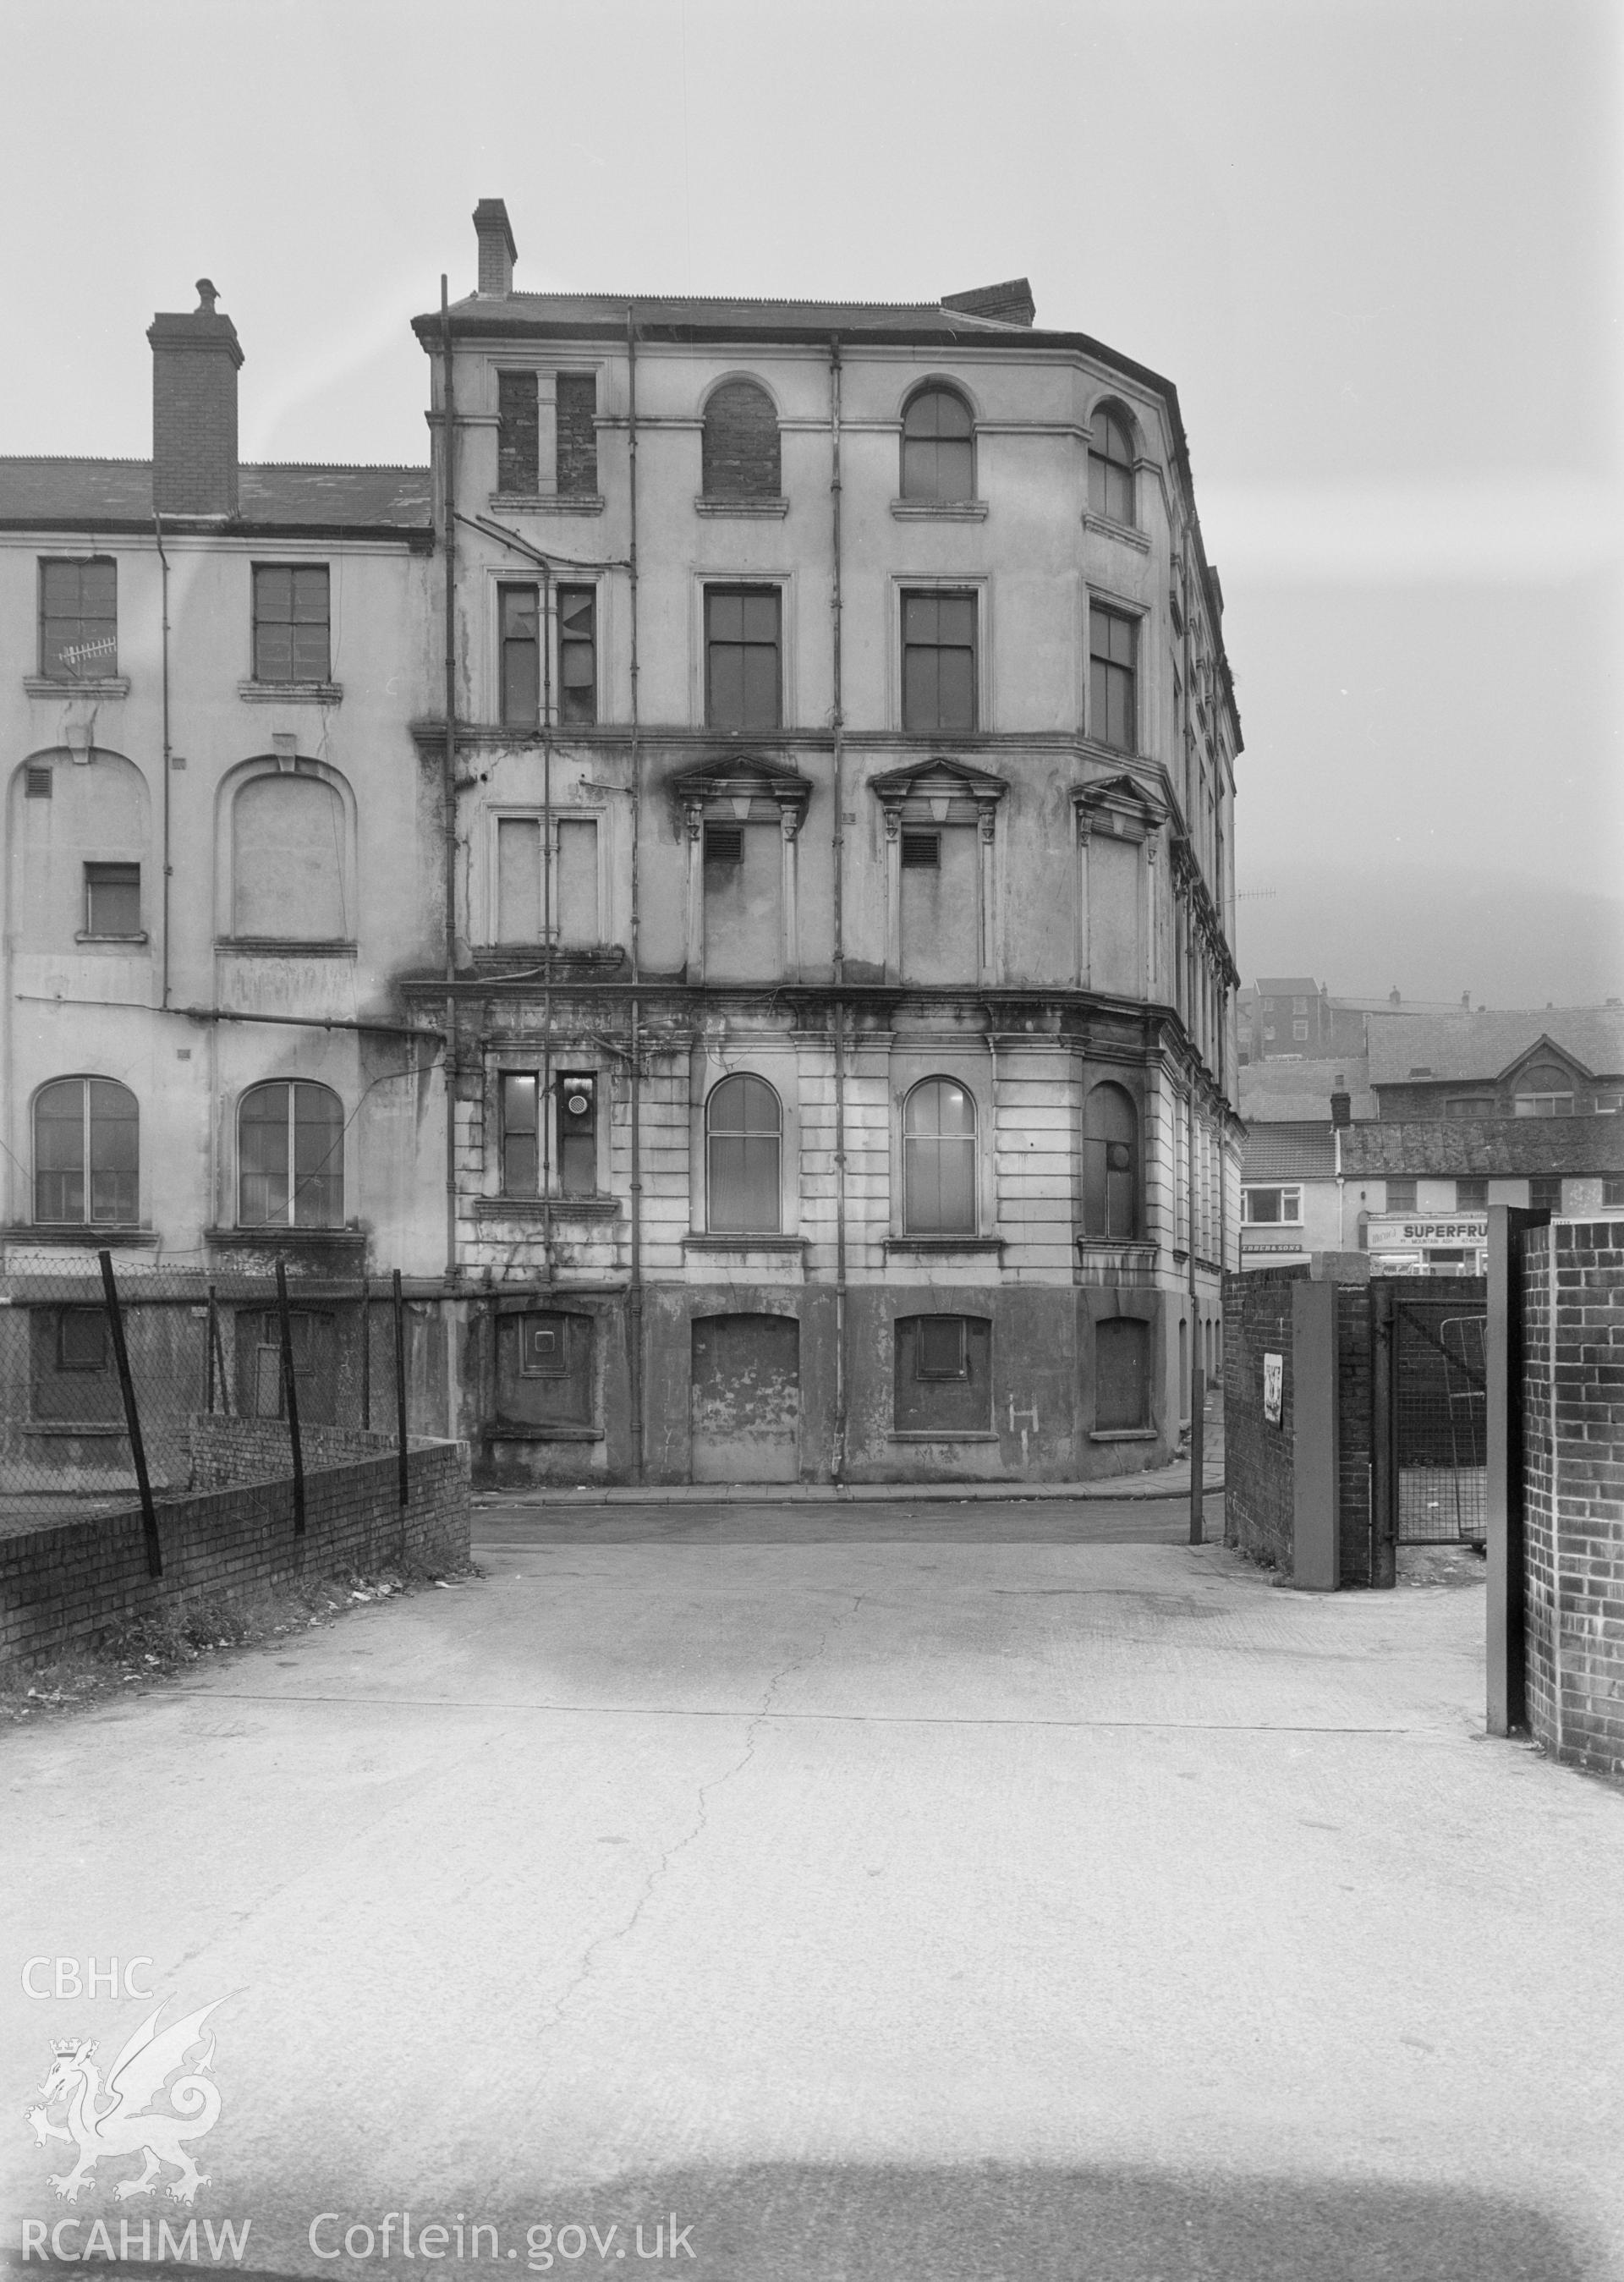 Digital copy of a black and white negative showing an exterior view of the Grand Hotel, Mountain Ash.